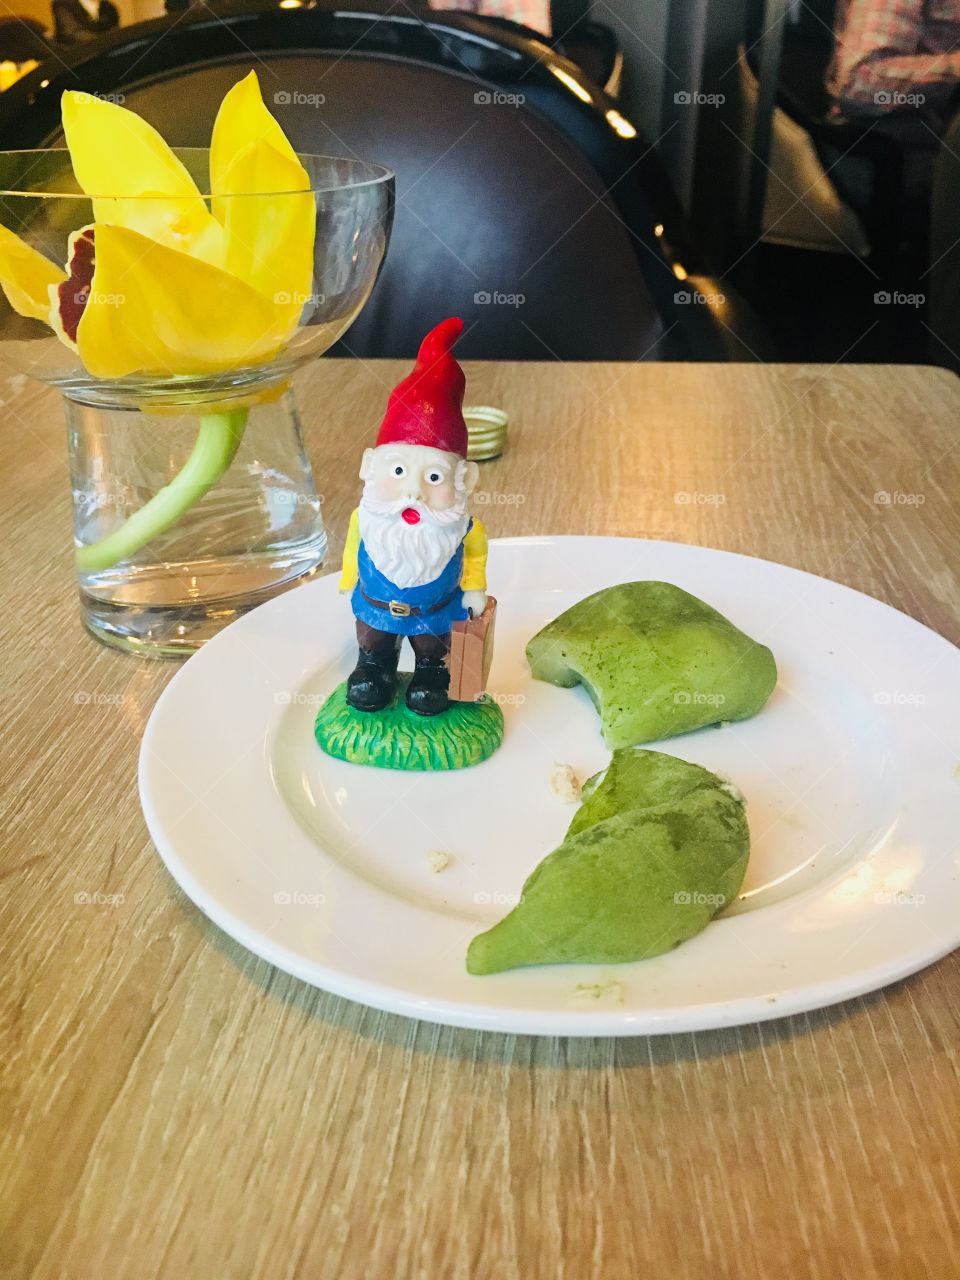 Gnomey was not as pleased with his Mochi. Melted. But very authentic and delicious - Hong Kong exec lounge 